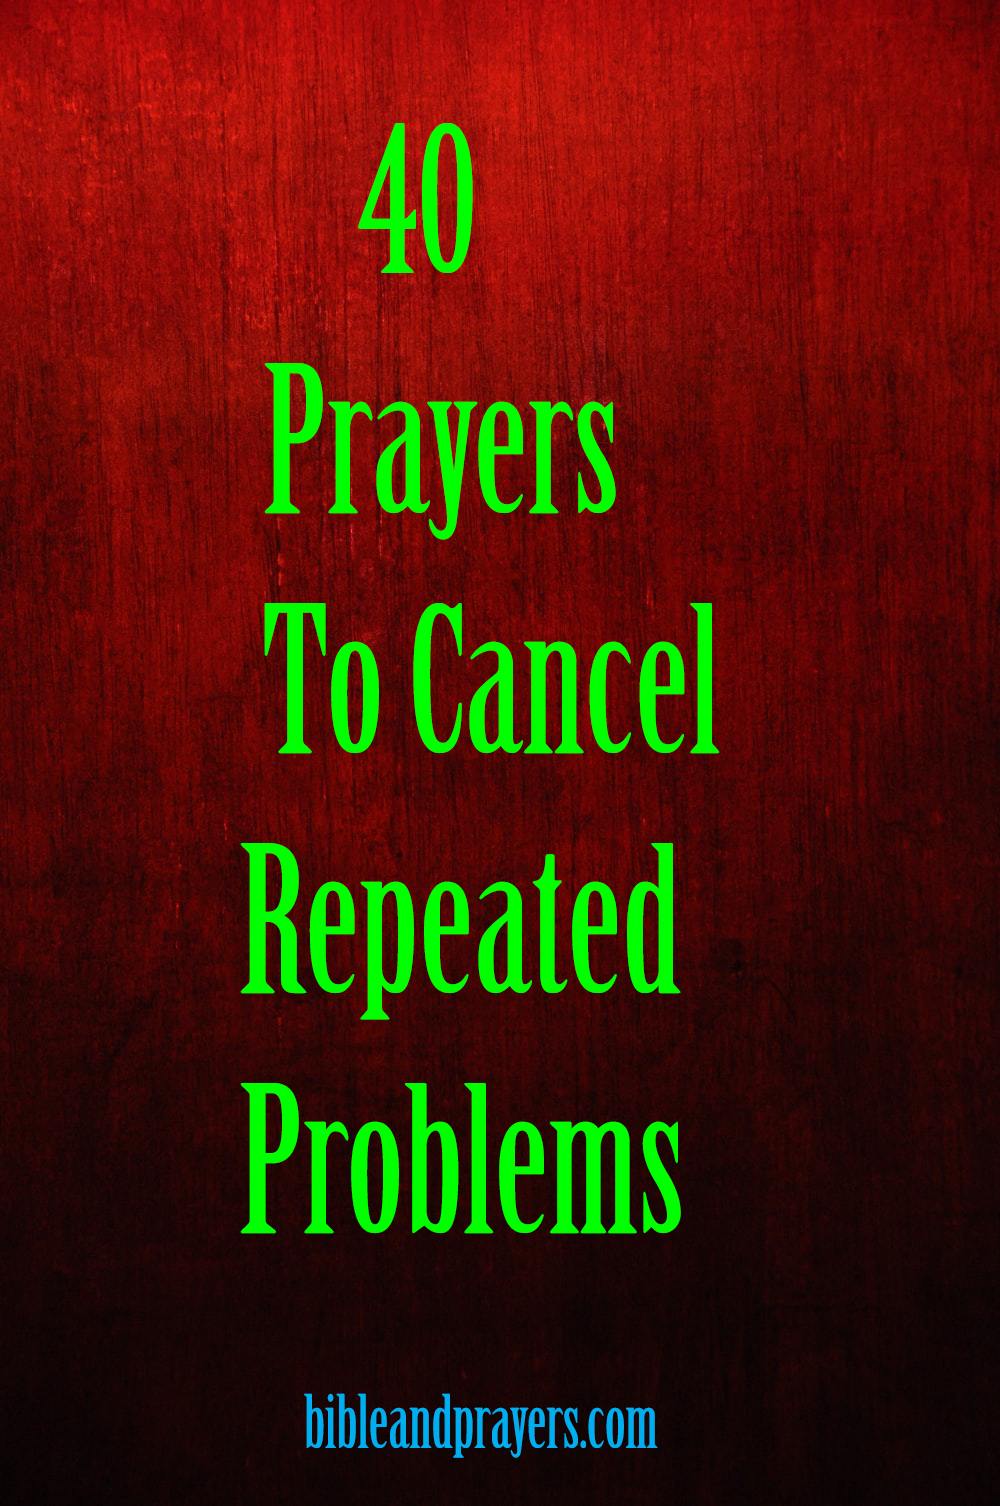 40 Prayers To Cancel Repeated Problems